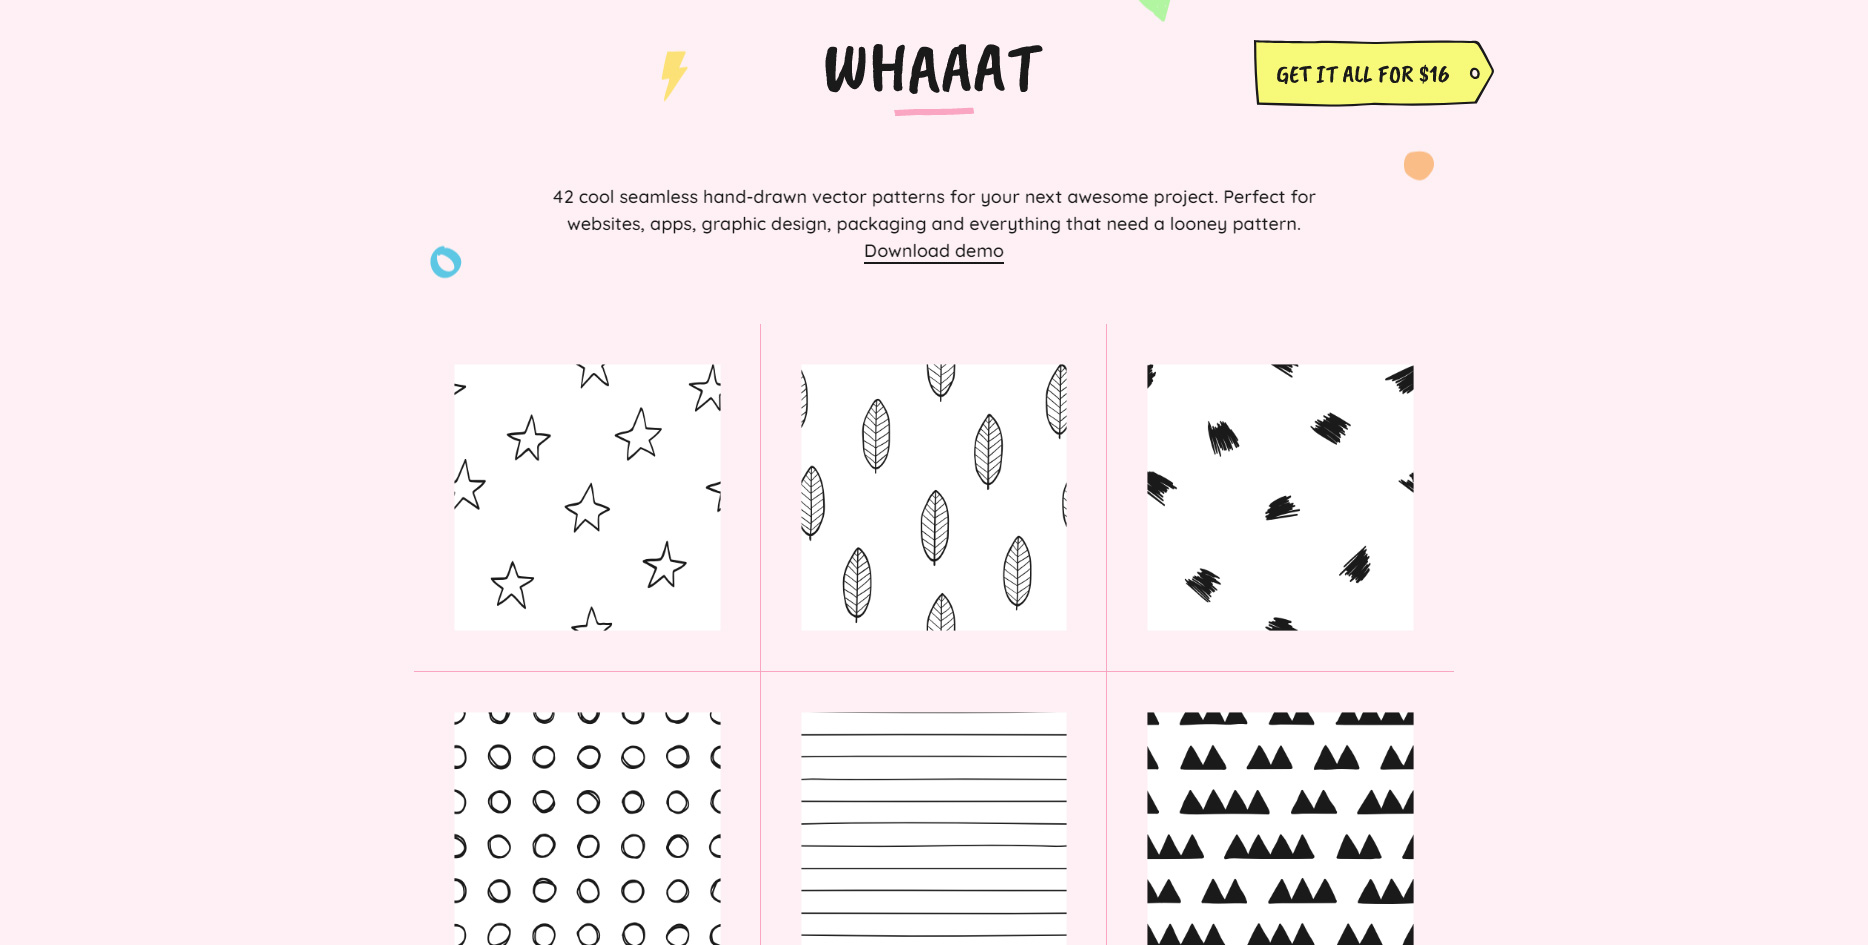 Looney Patterns - Website of the Day